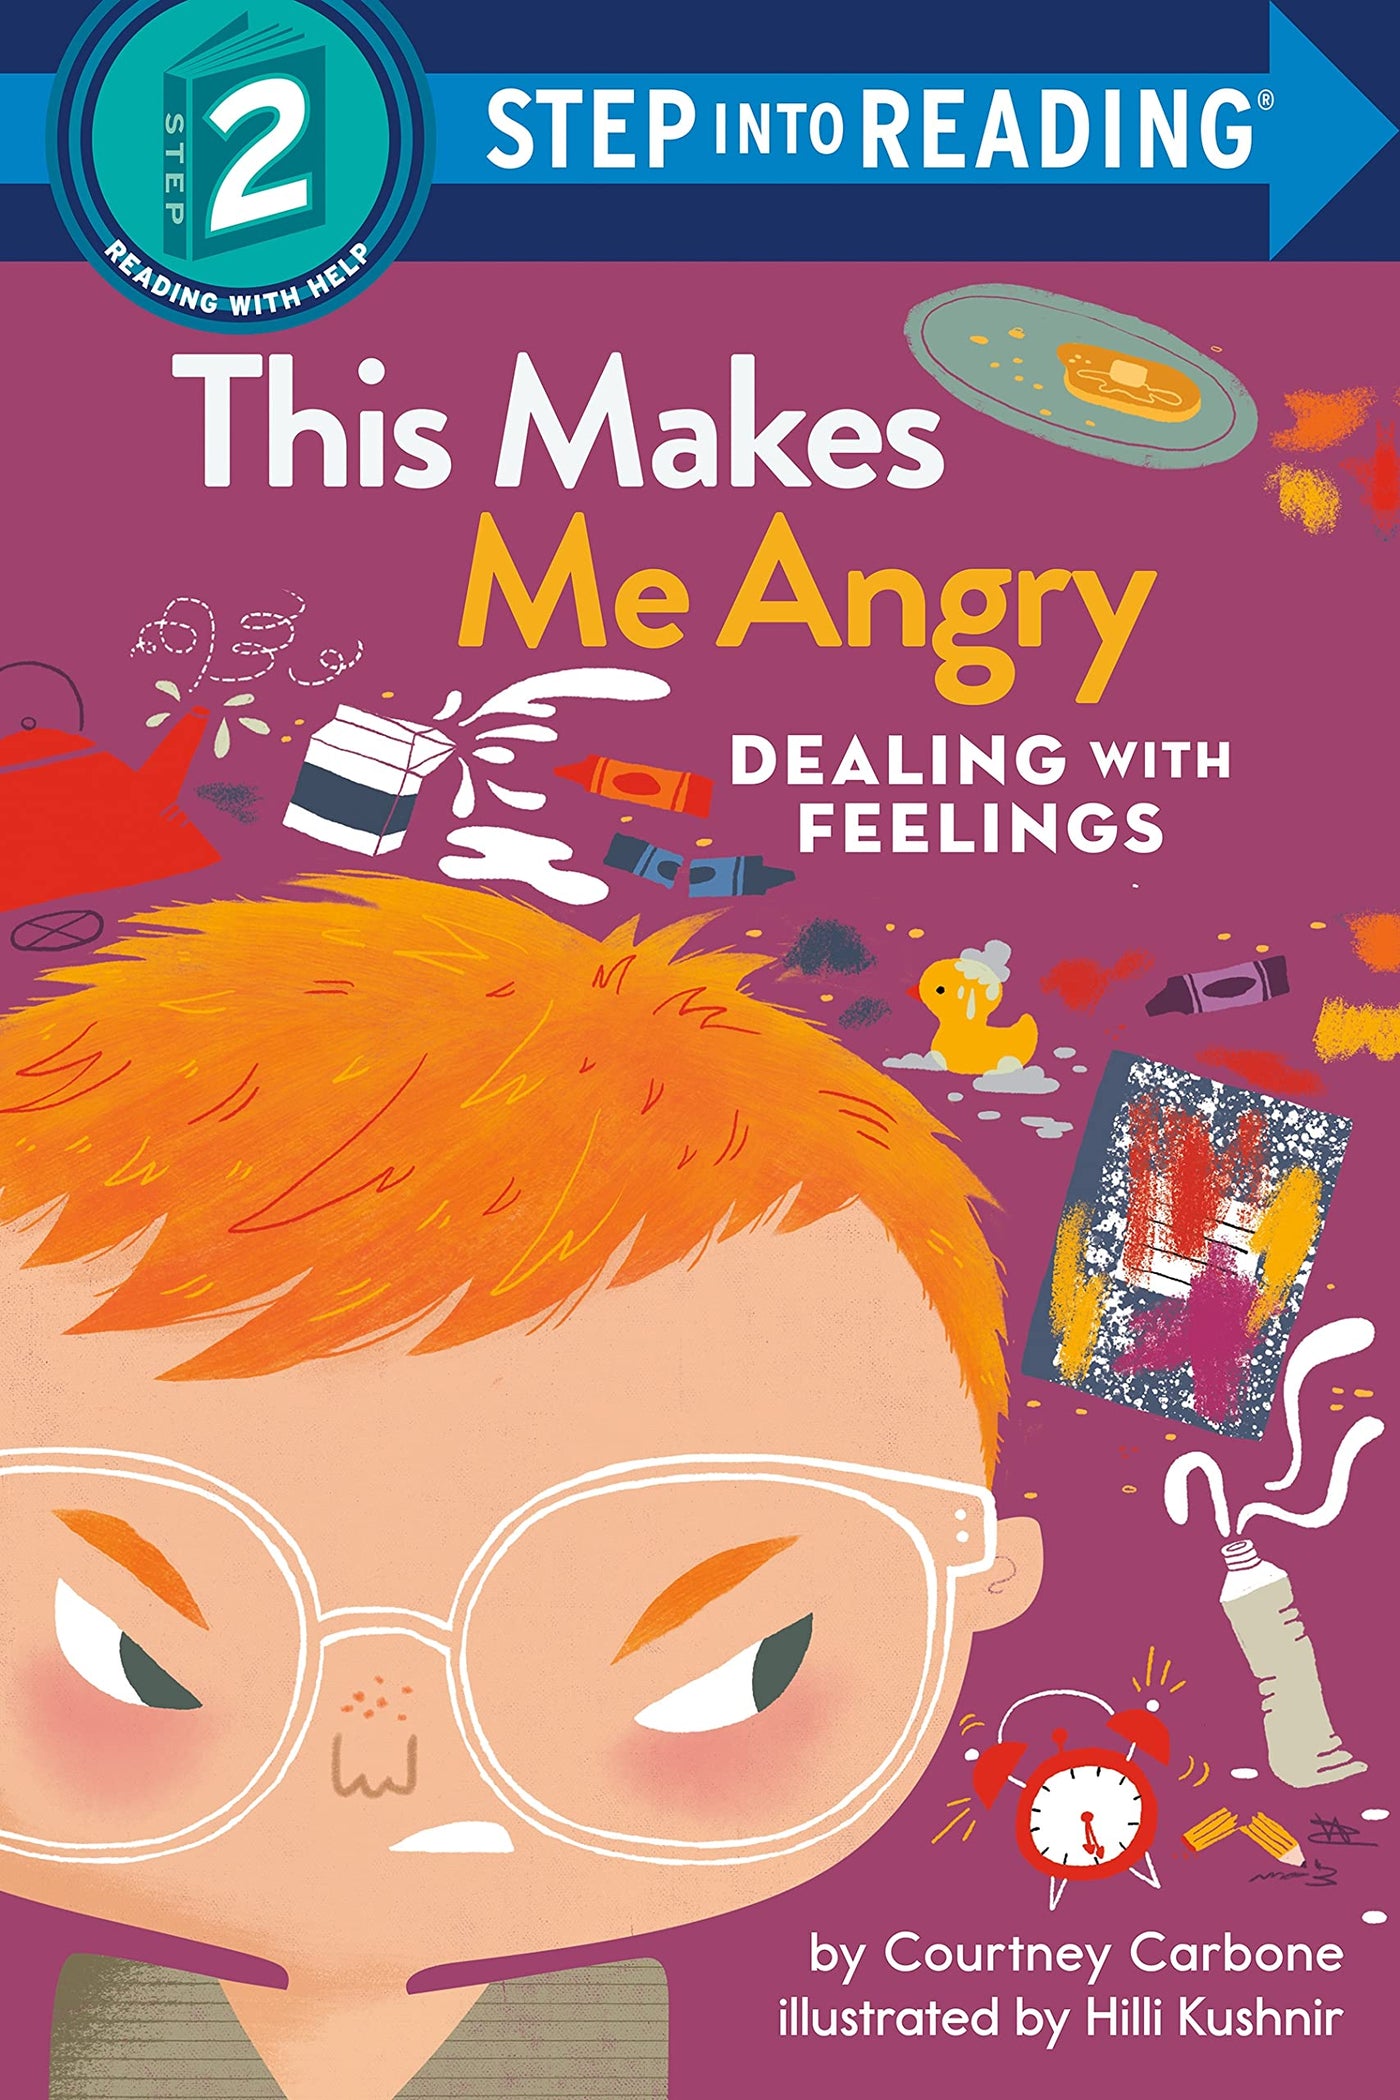 This Makes Me Angry - Dealing With Feelings Step into Reading Book - Two Little Birds Boutique